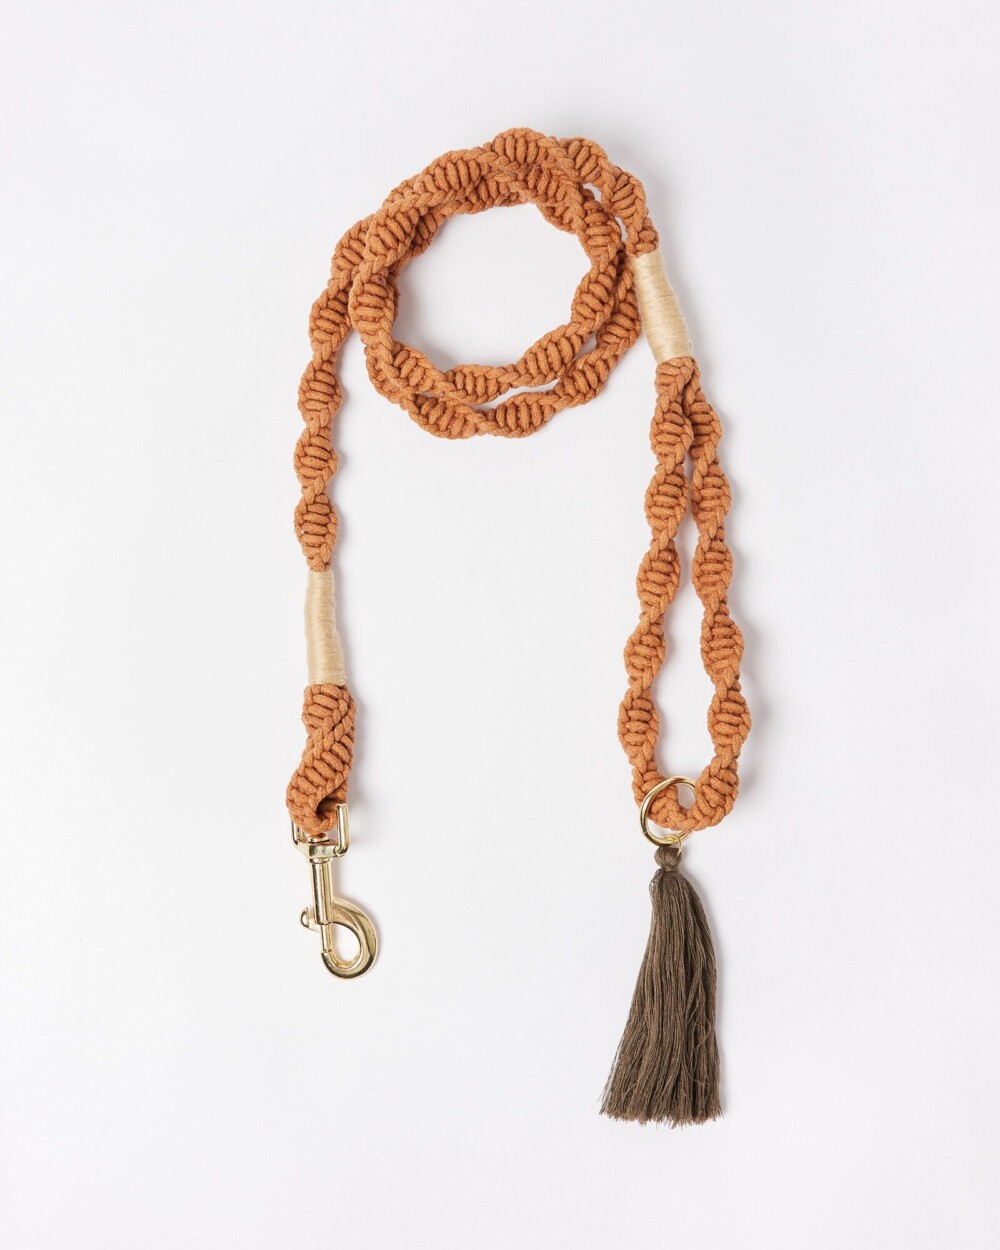 a orange/brown sunset coloured twister rope lead with a tassel and gold detail glasp, shown against a white background